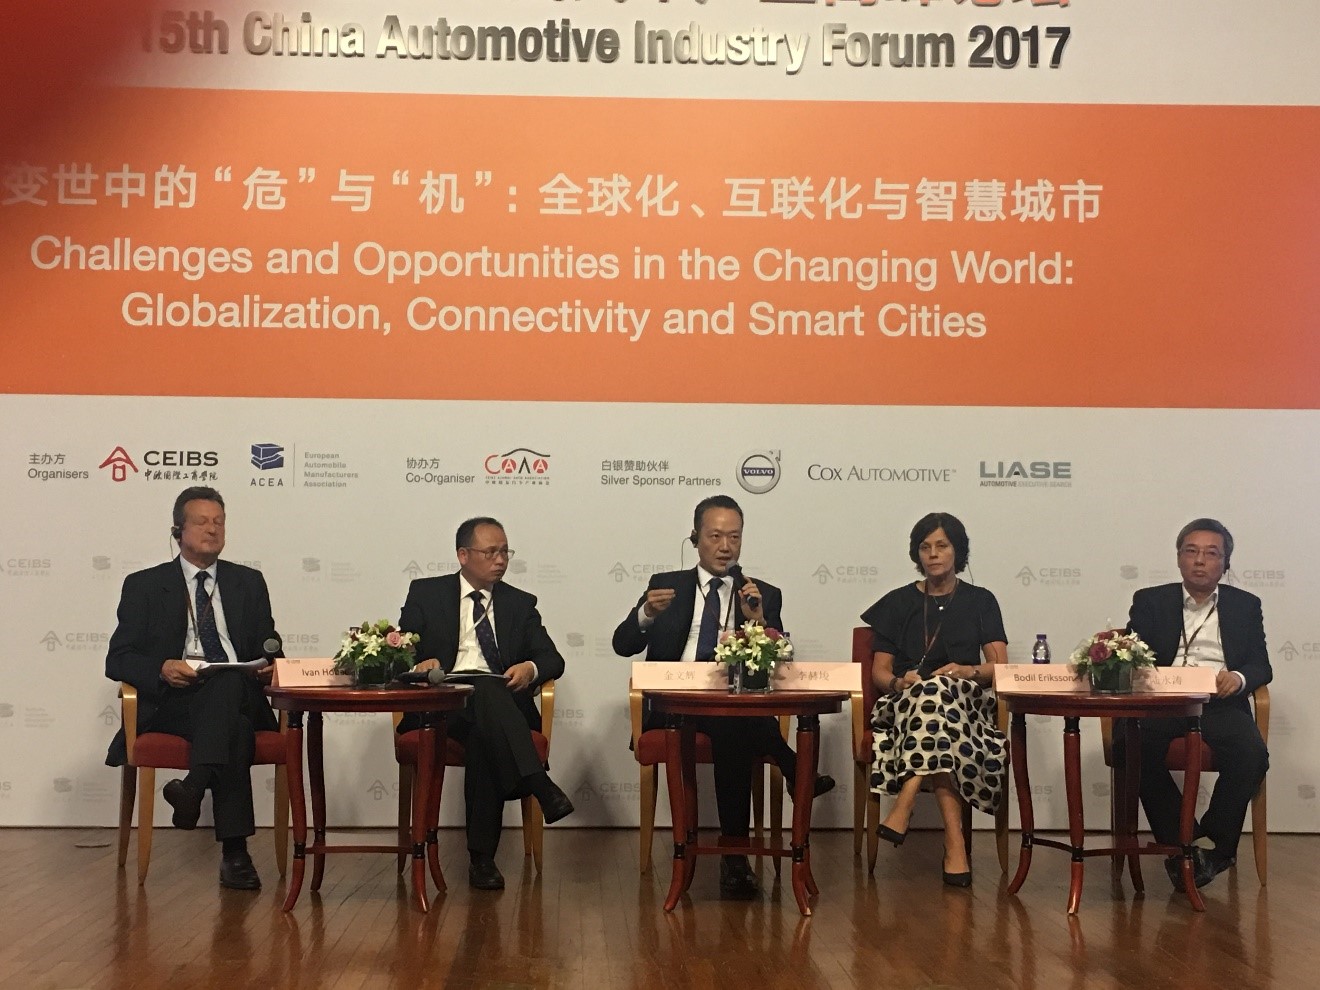 From left to right: Mr. Ivan Hodac, Founder and President, Aspen Institute Prague; Mr. Jin Wenhui, Executive Vice President, Jiangling Motors Co., Ltd.; Mr. Hyuk Joon Lee, Vice President, Hyundai Motor Group (China) Ltd.; Ms. Bodil Eriksson, Chief Executive Officer, Volvo Cars Mobility; Mr. Lu Yongtao, Director and General Manager of SAIC Capital, Chairman and General Manager of SAIC Venture Capital. 